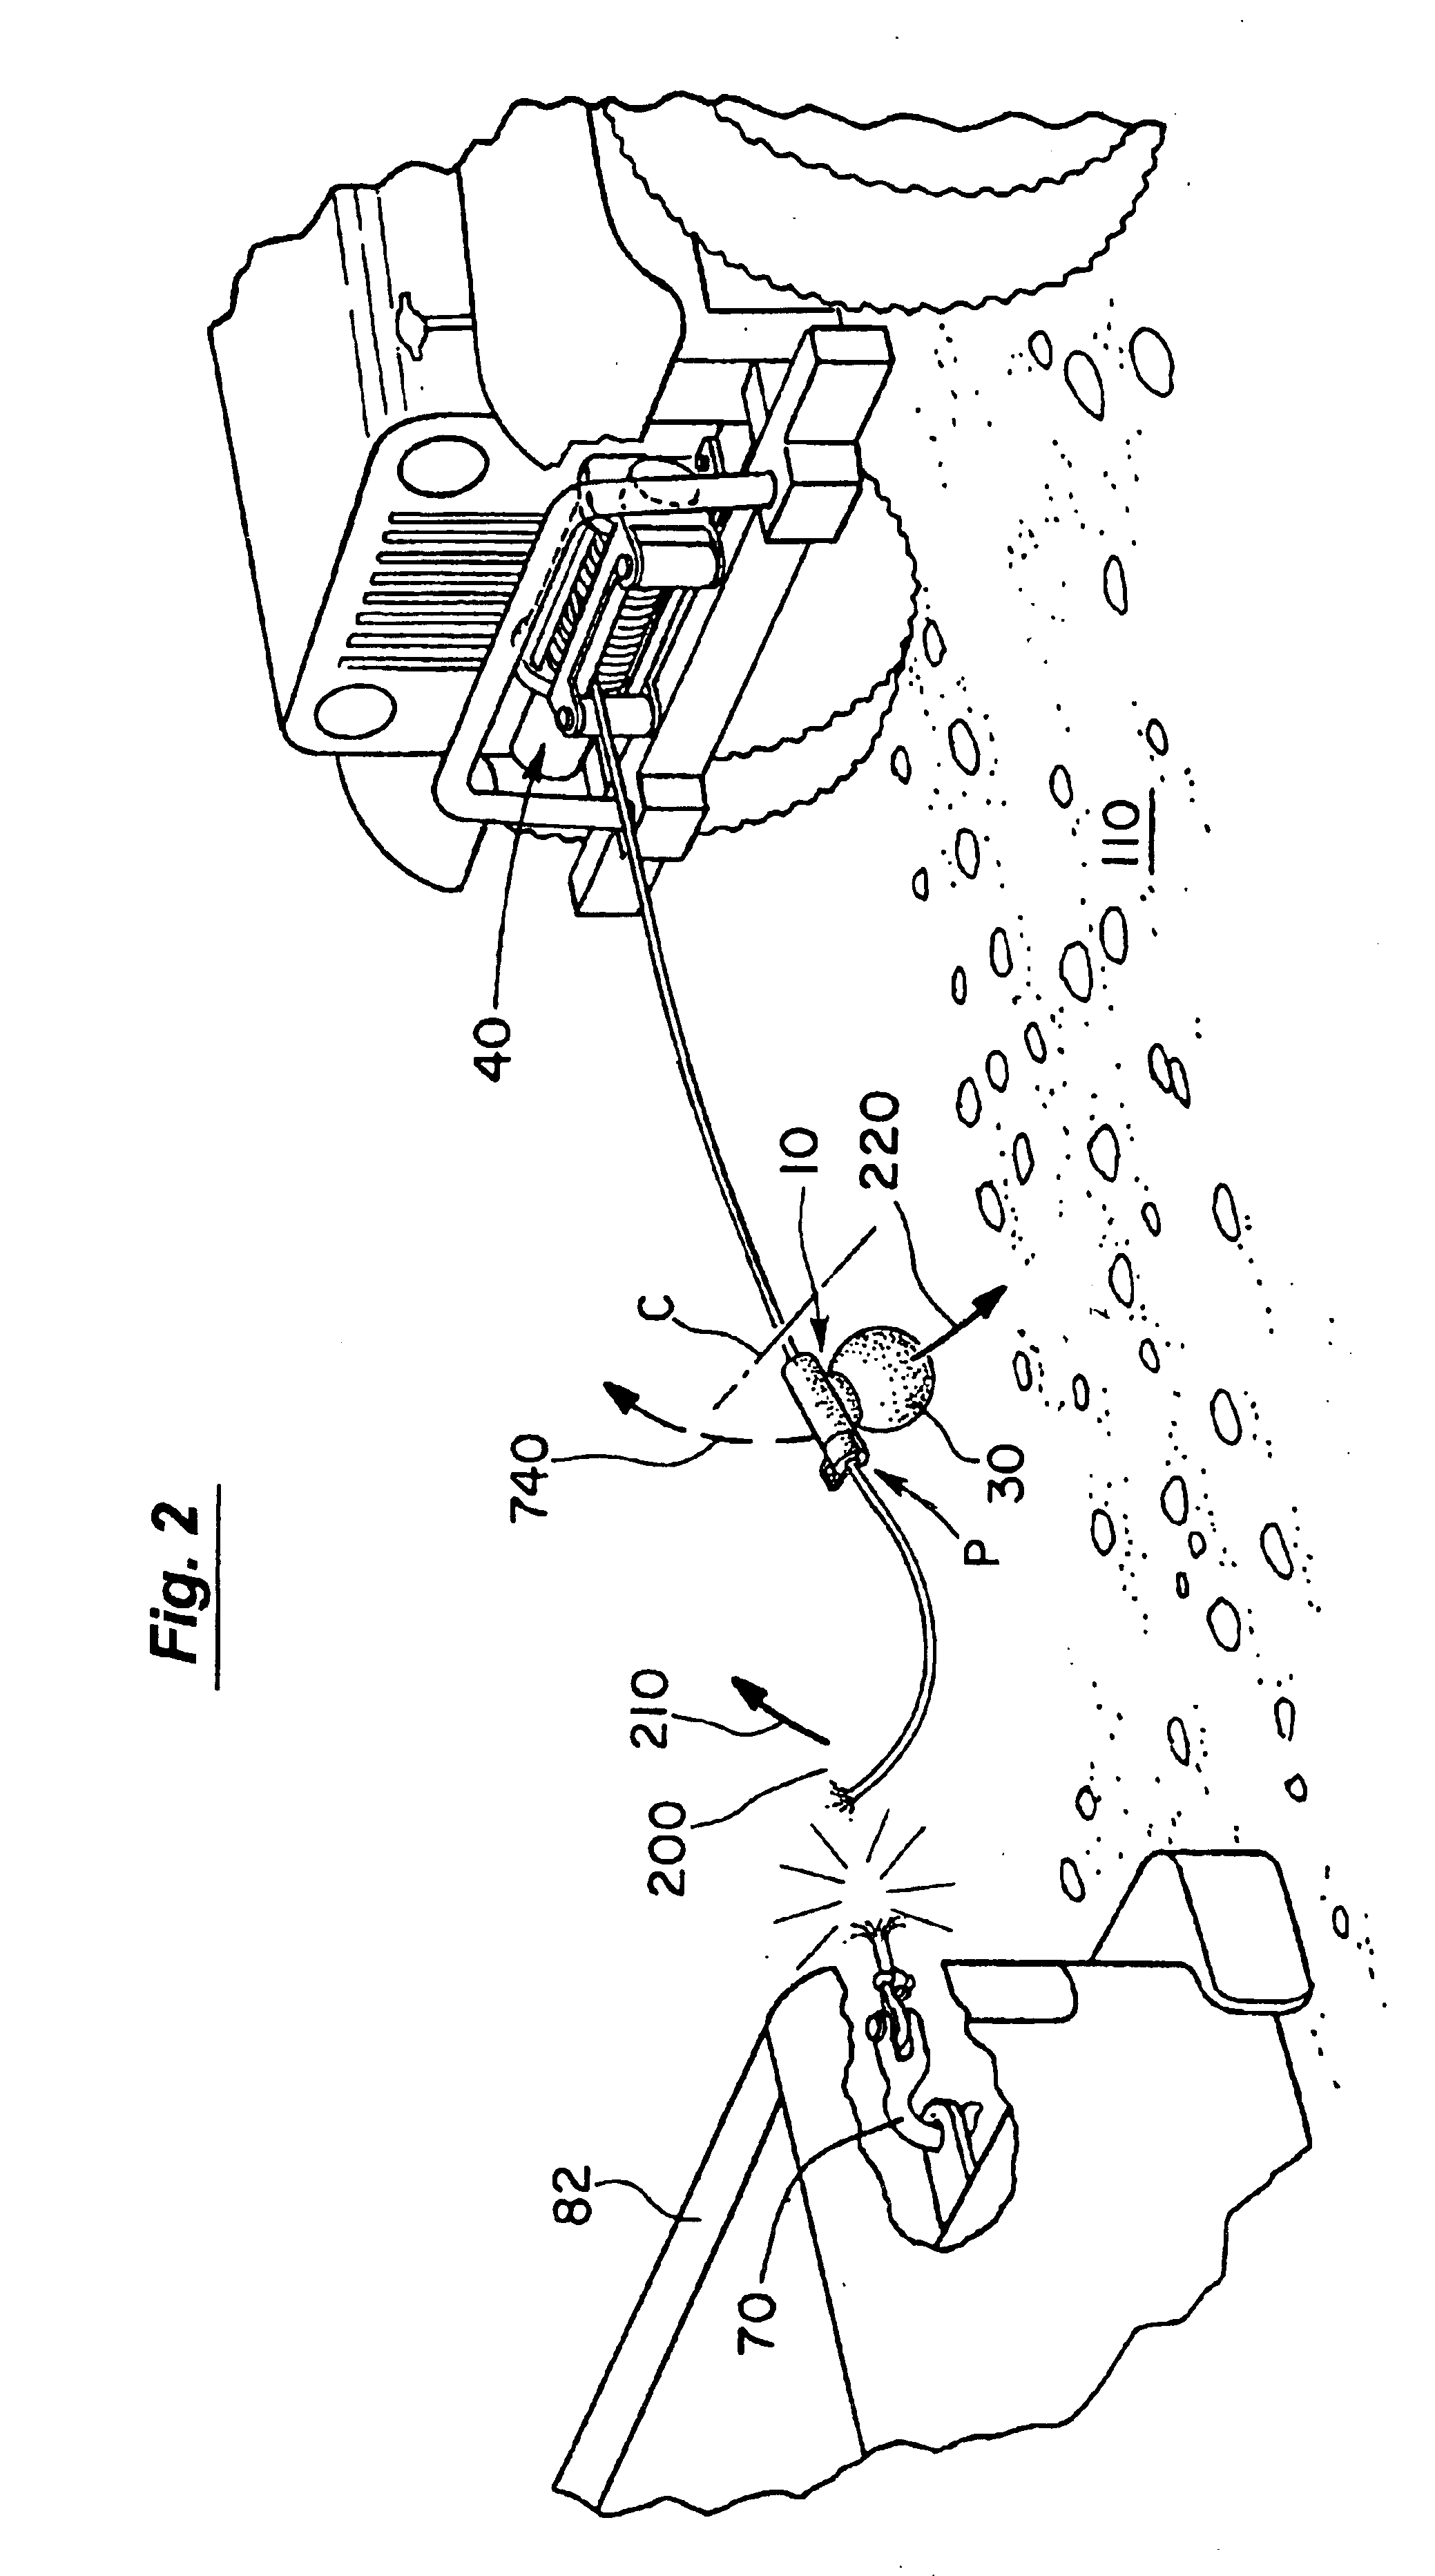 Winch line safety device and method therefor